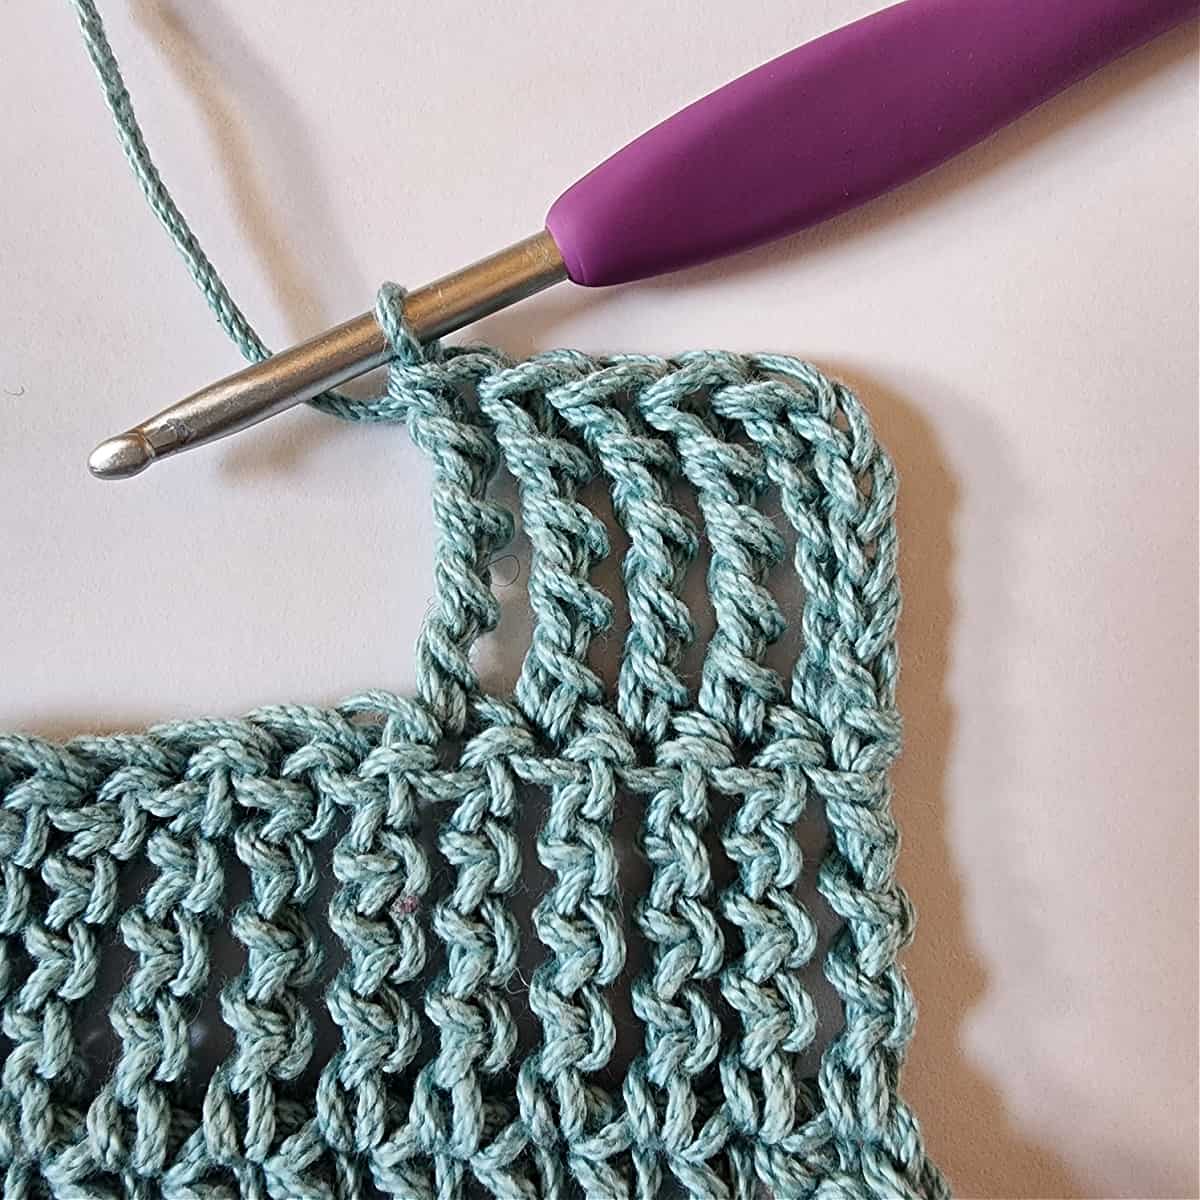 Small blue green crochet swatch showing a chainless triple treble and four triple treble crochet stitches.